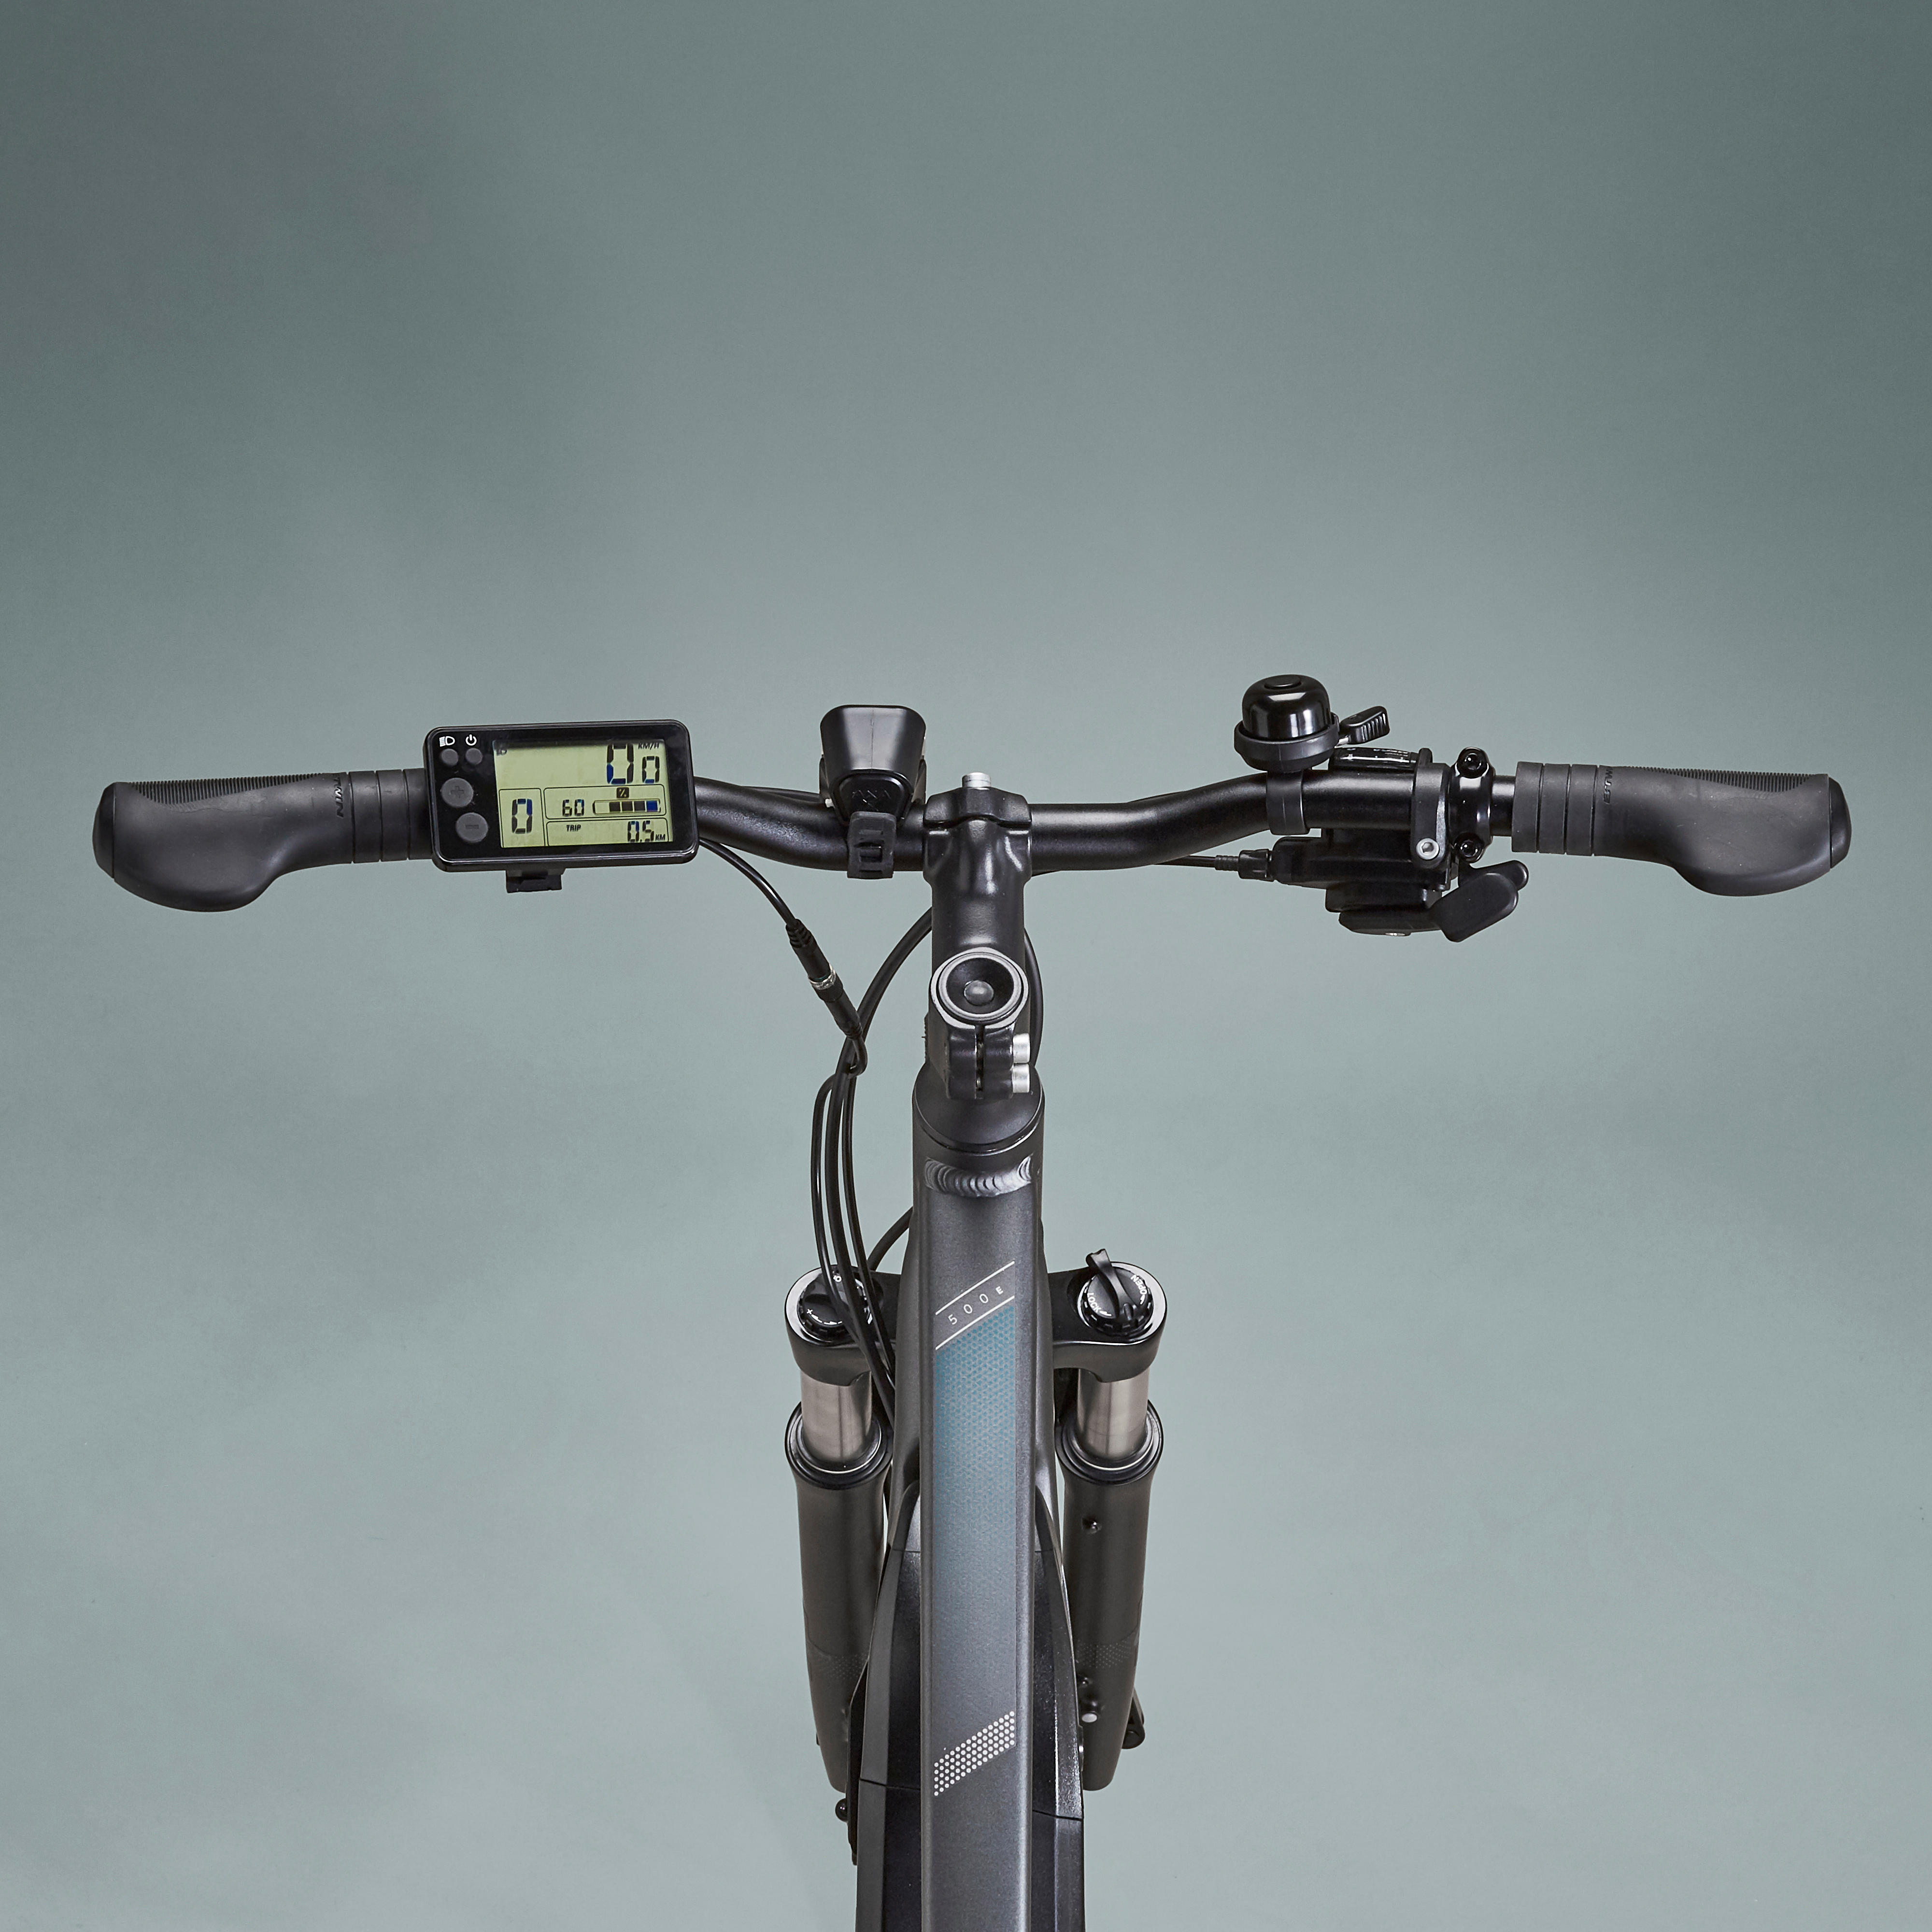 difference between electric and hybrid bikes